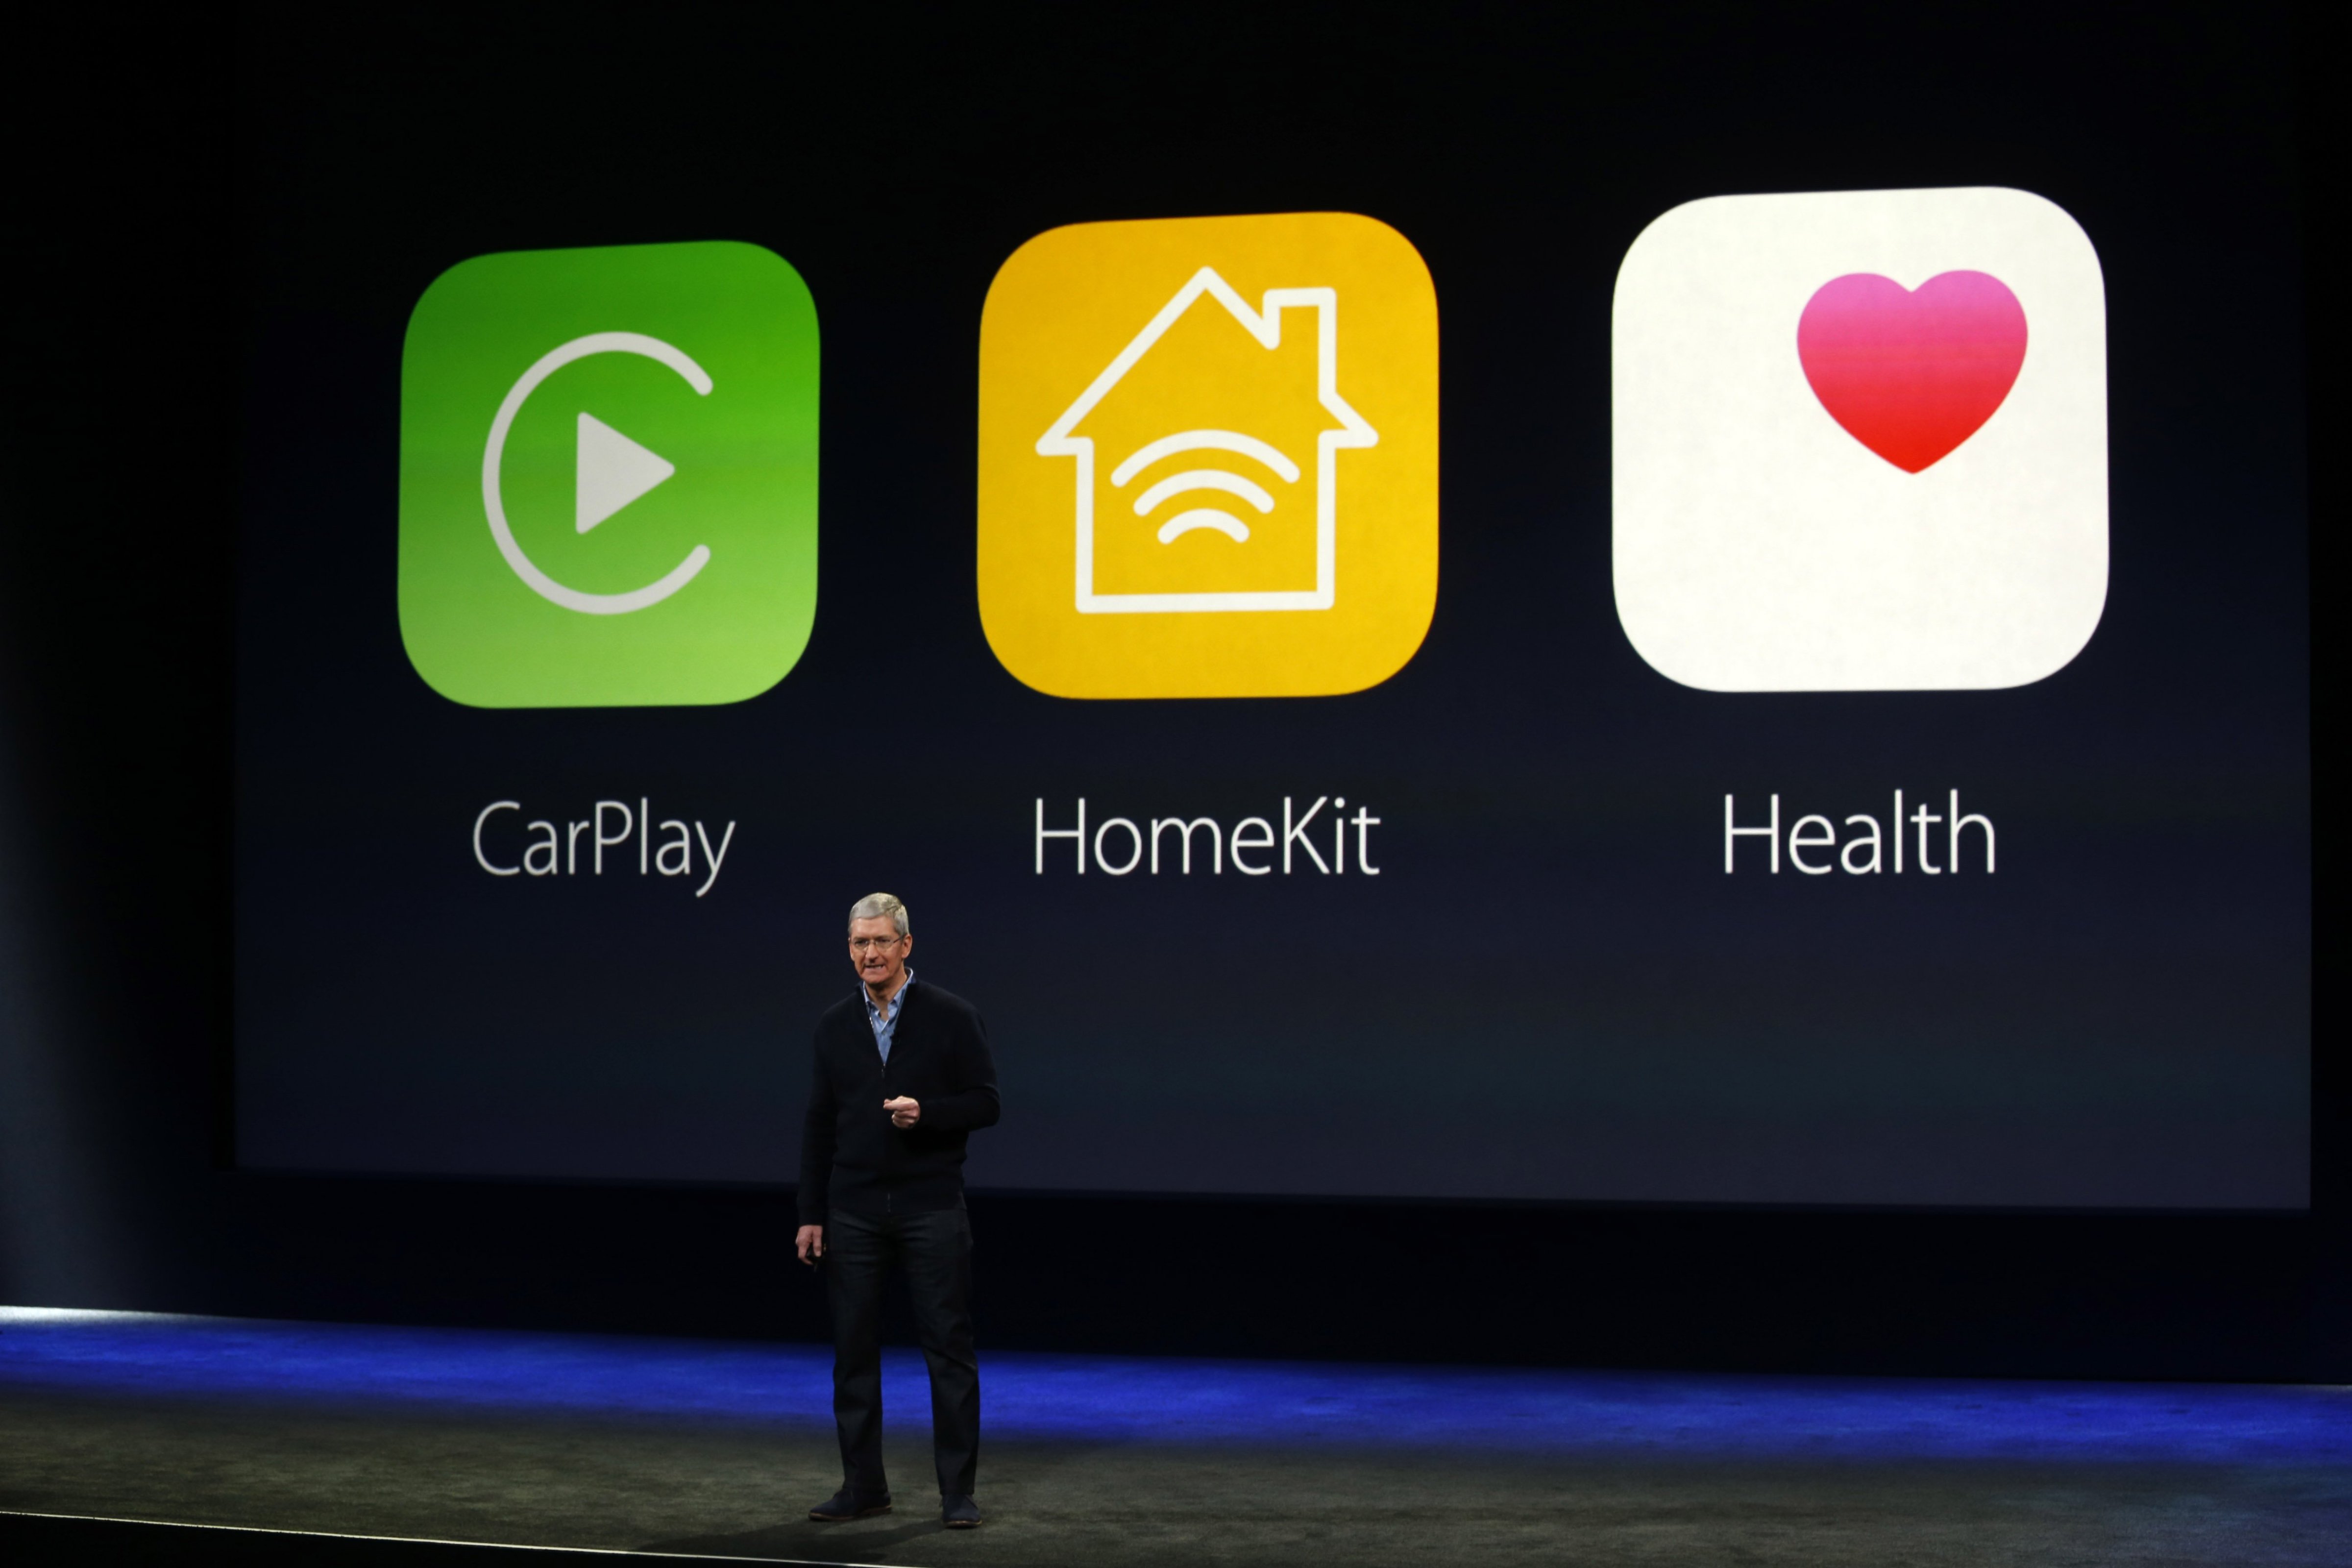 Apple CEO Tim Cook speaks on stage during an Apple special event at the Yerba Buena Center for the Arts on March 9, 2015 in San Francisco.